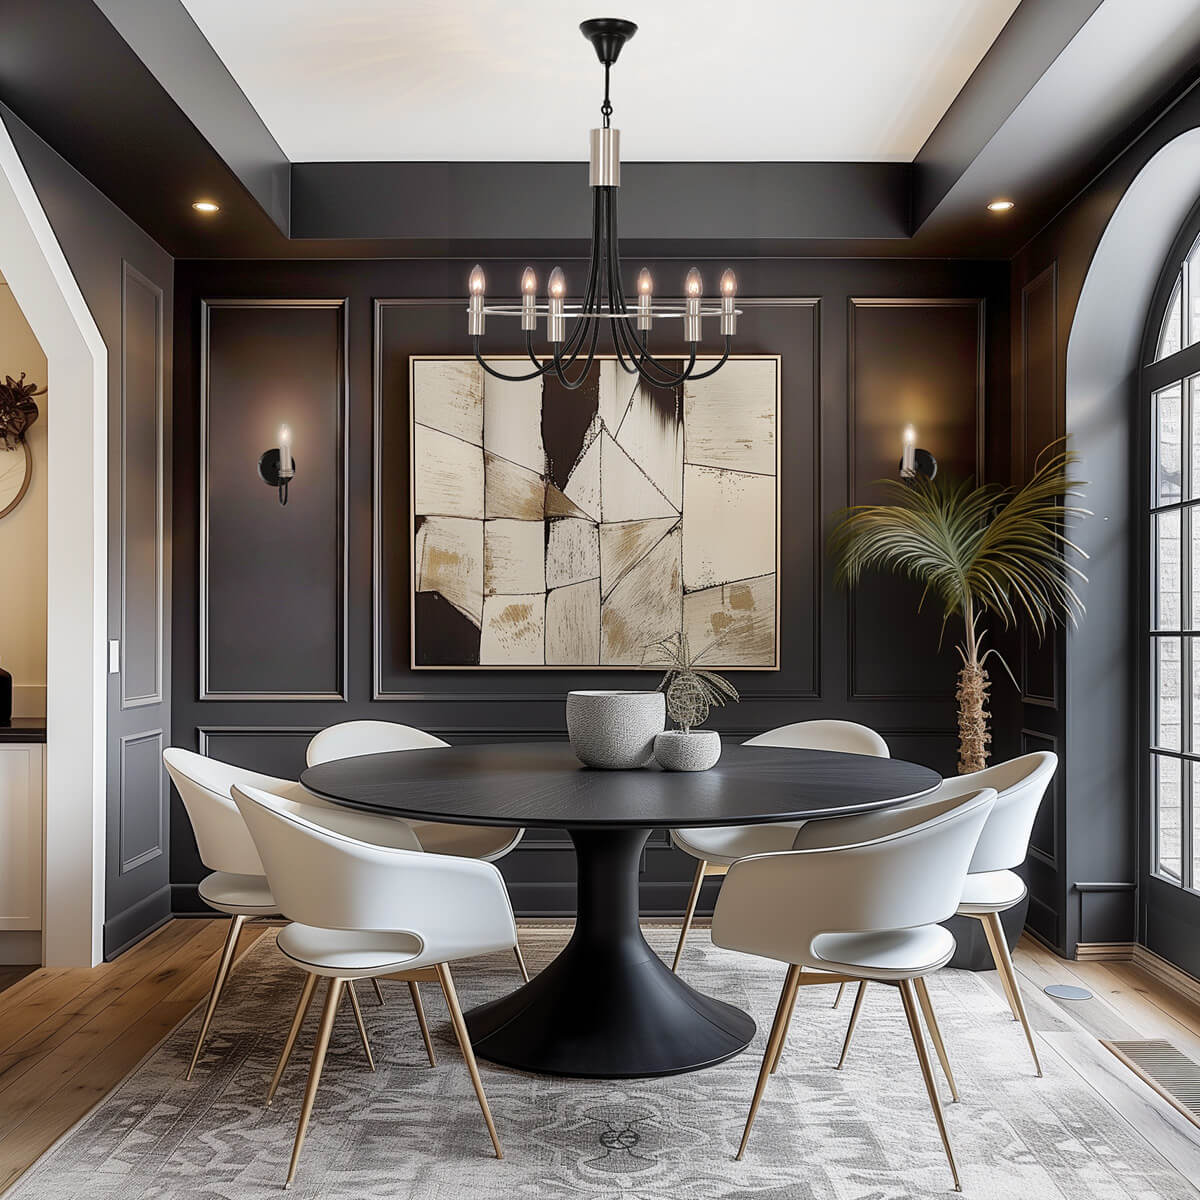 Moody dining room with a Chandelier